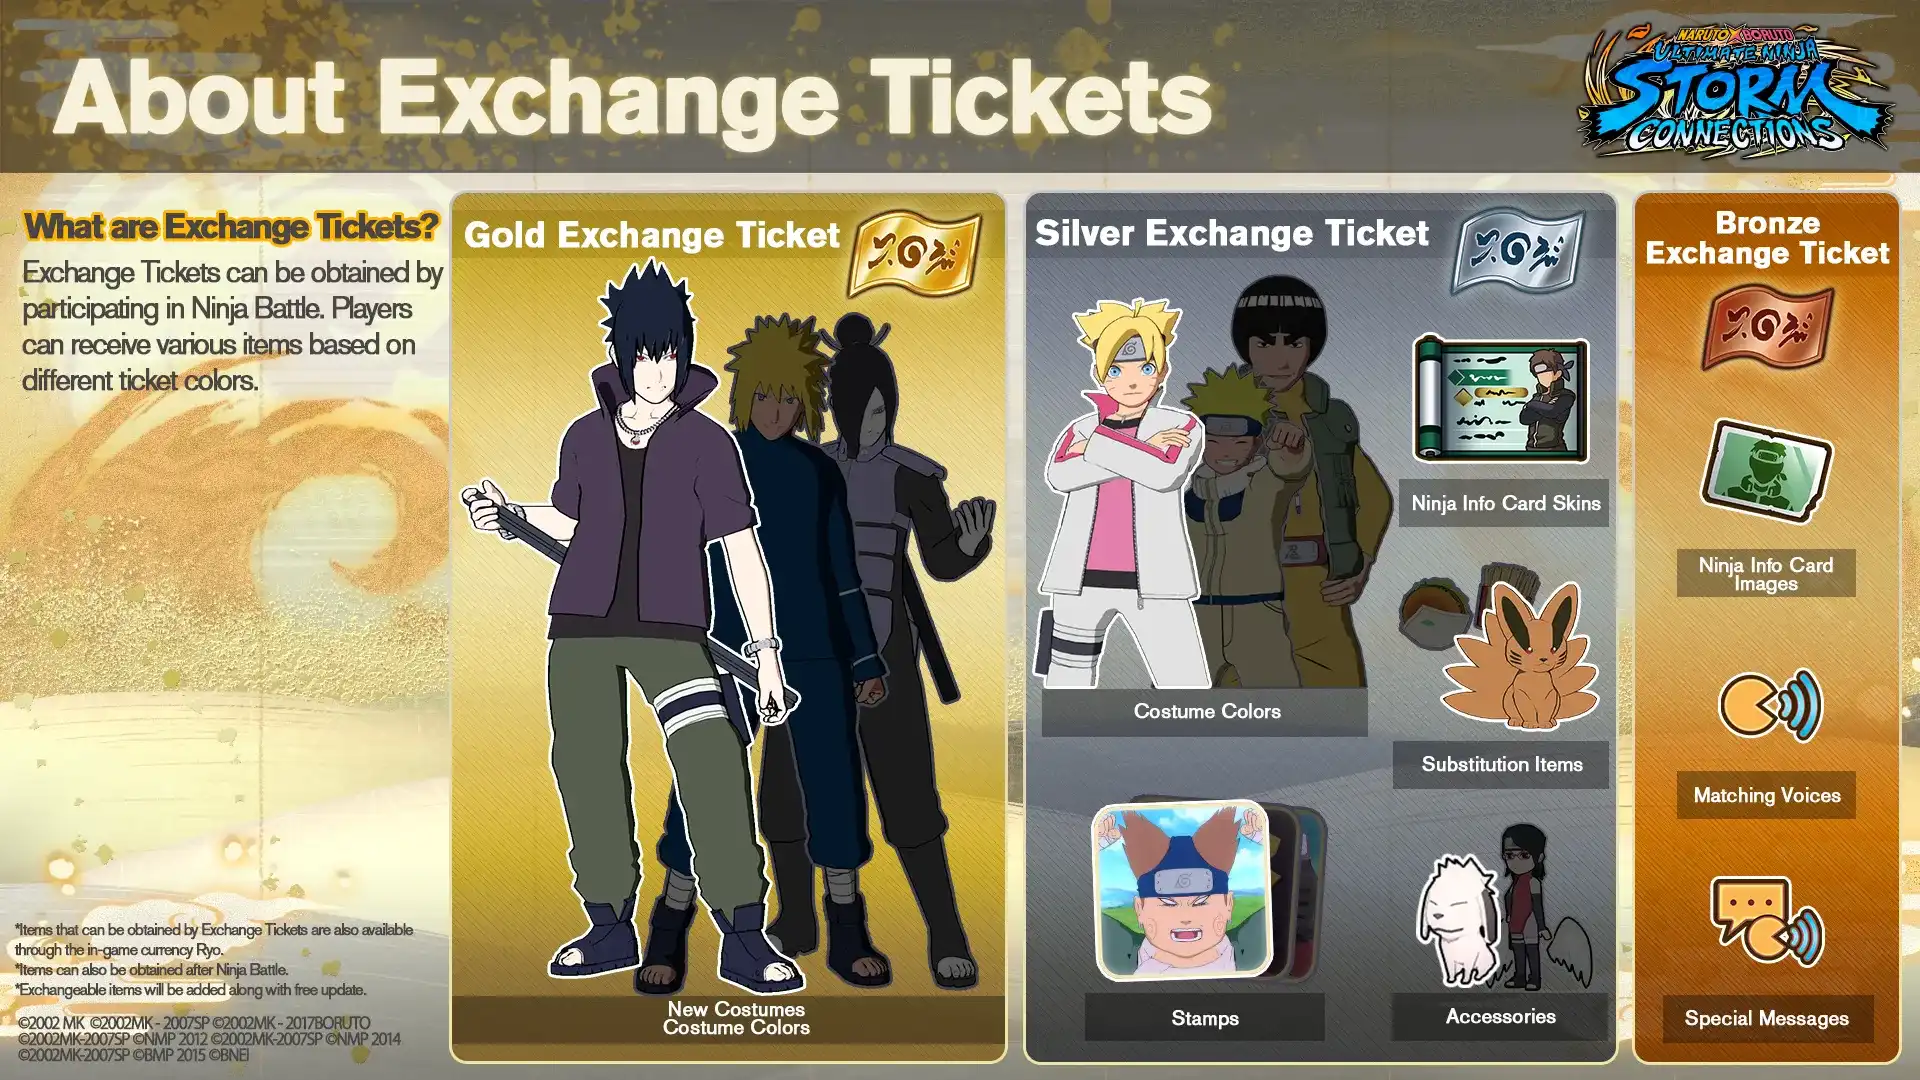 Infographic explaining the use of Exchange Tickets rewarded from a Ninja Battle event